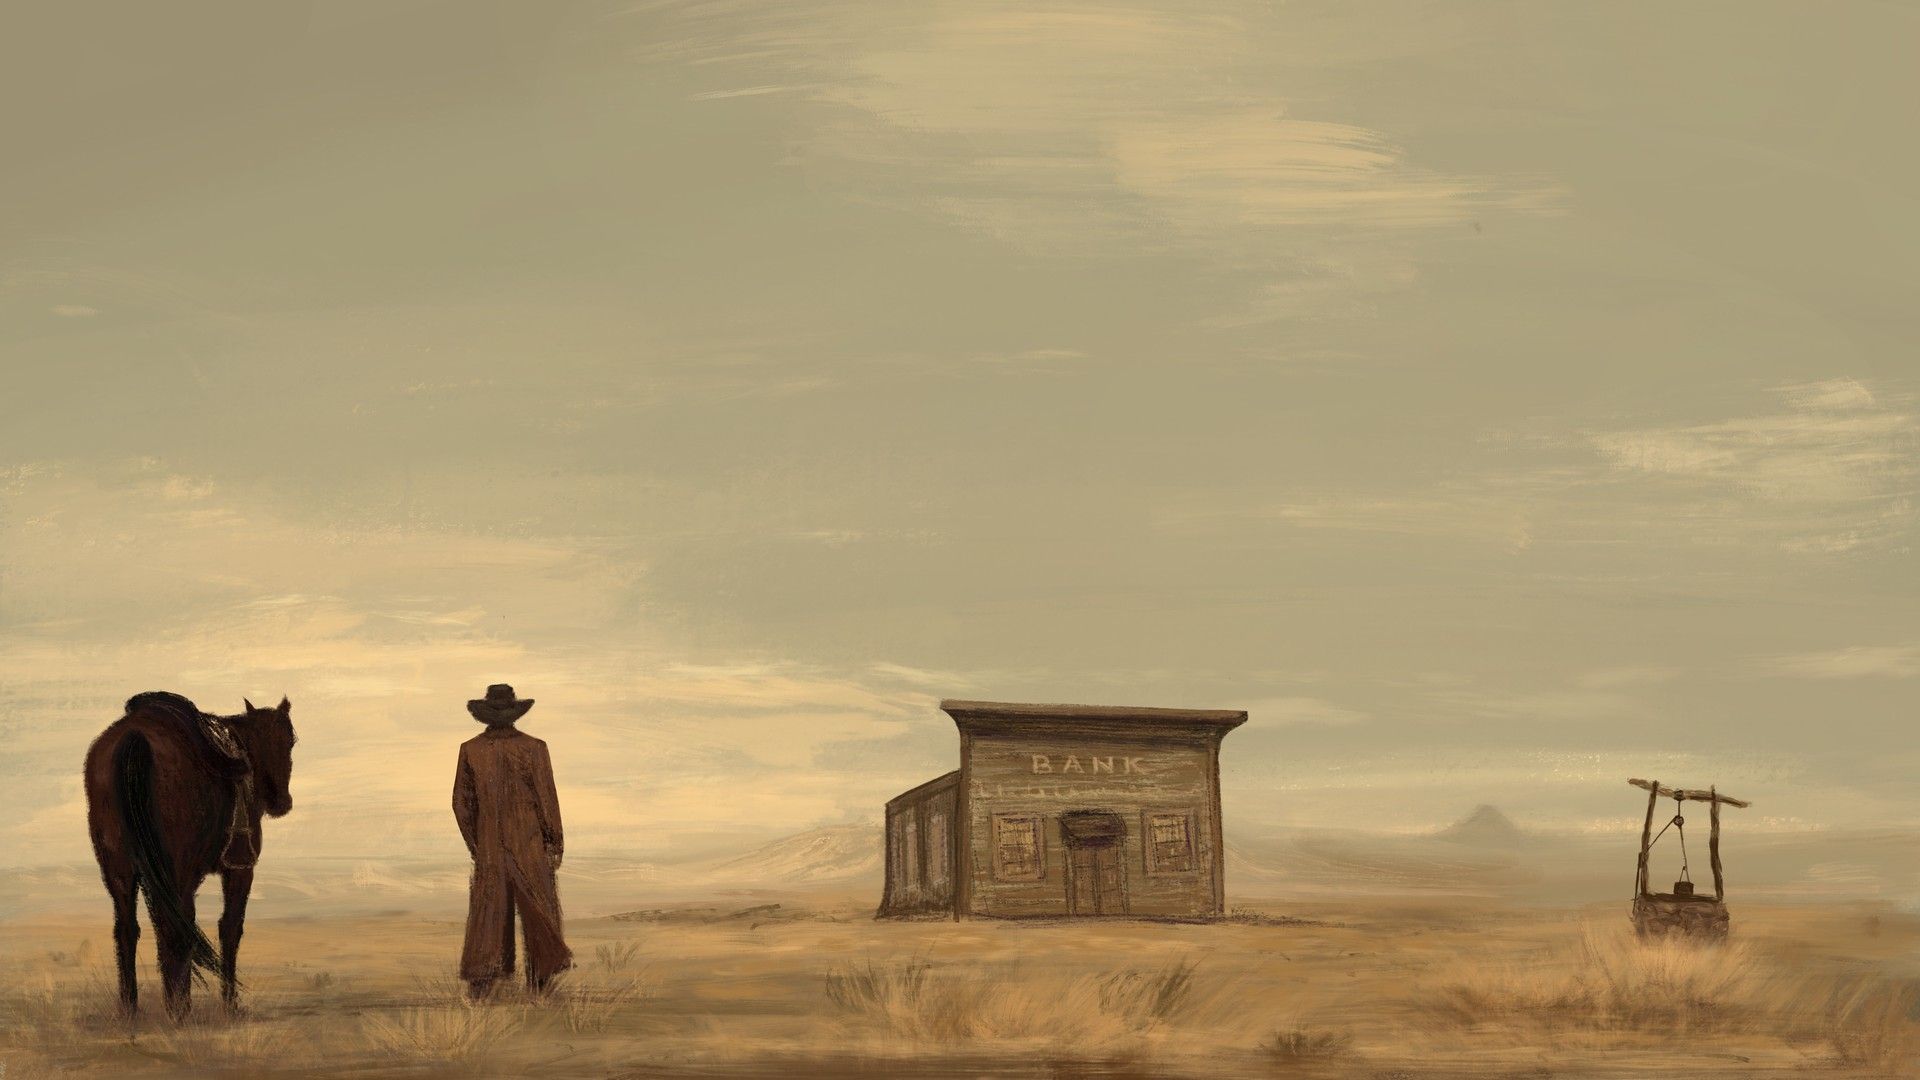 Inspirited by 'The Ballad of Buster Scruggs', Maria O